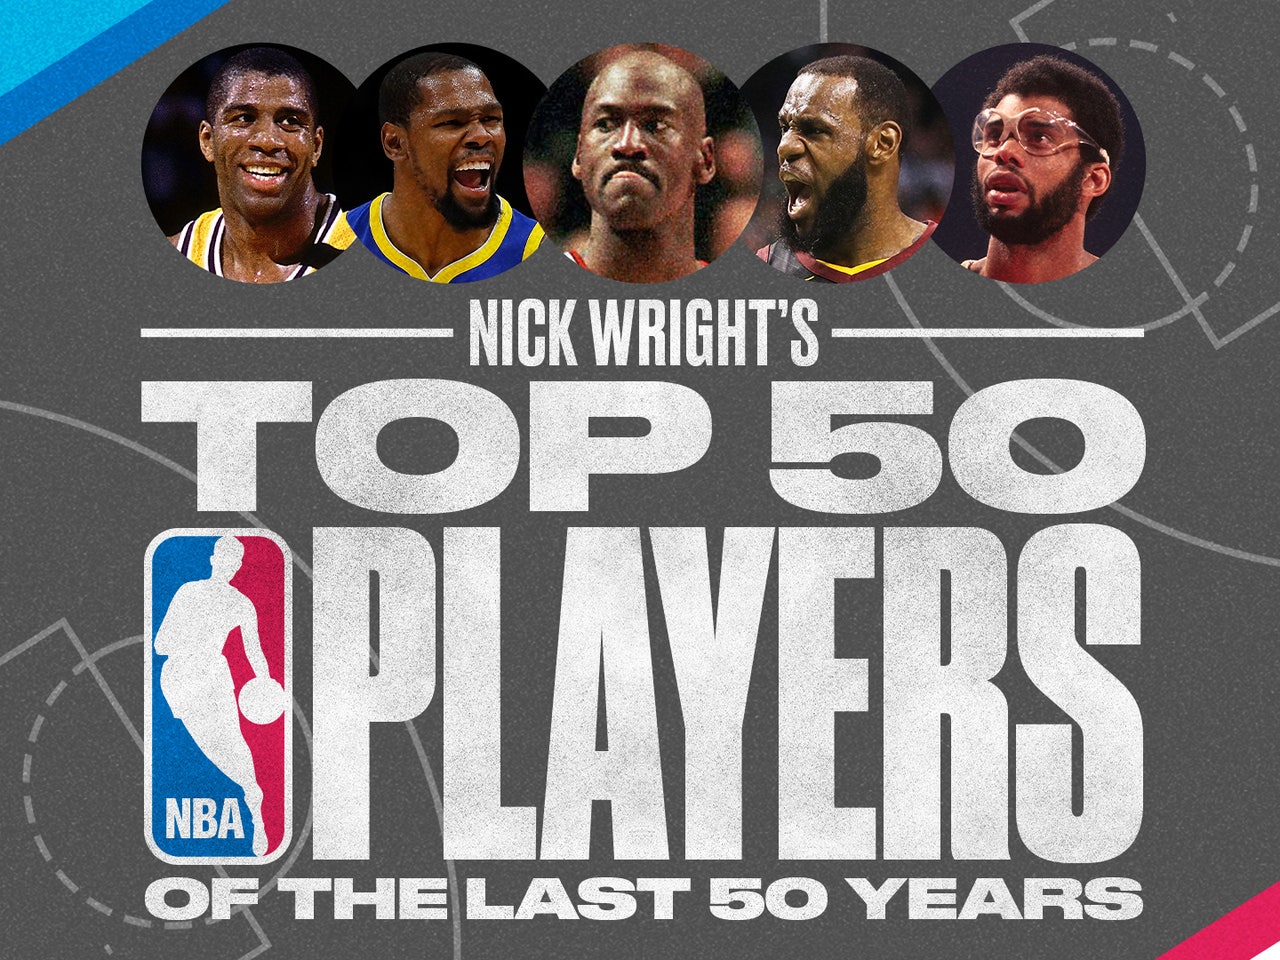 If the best pro basketball players from 40-50 years ago played